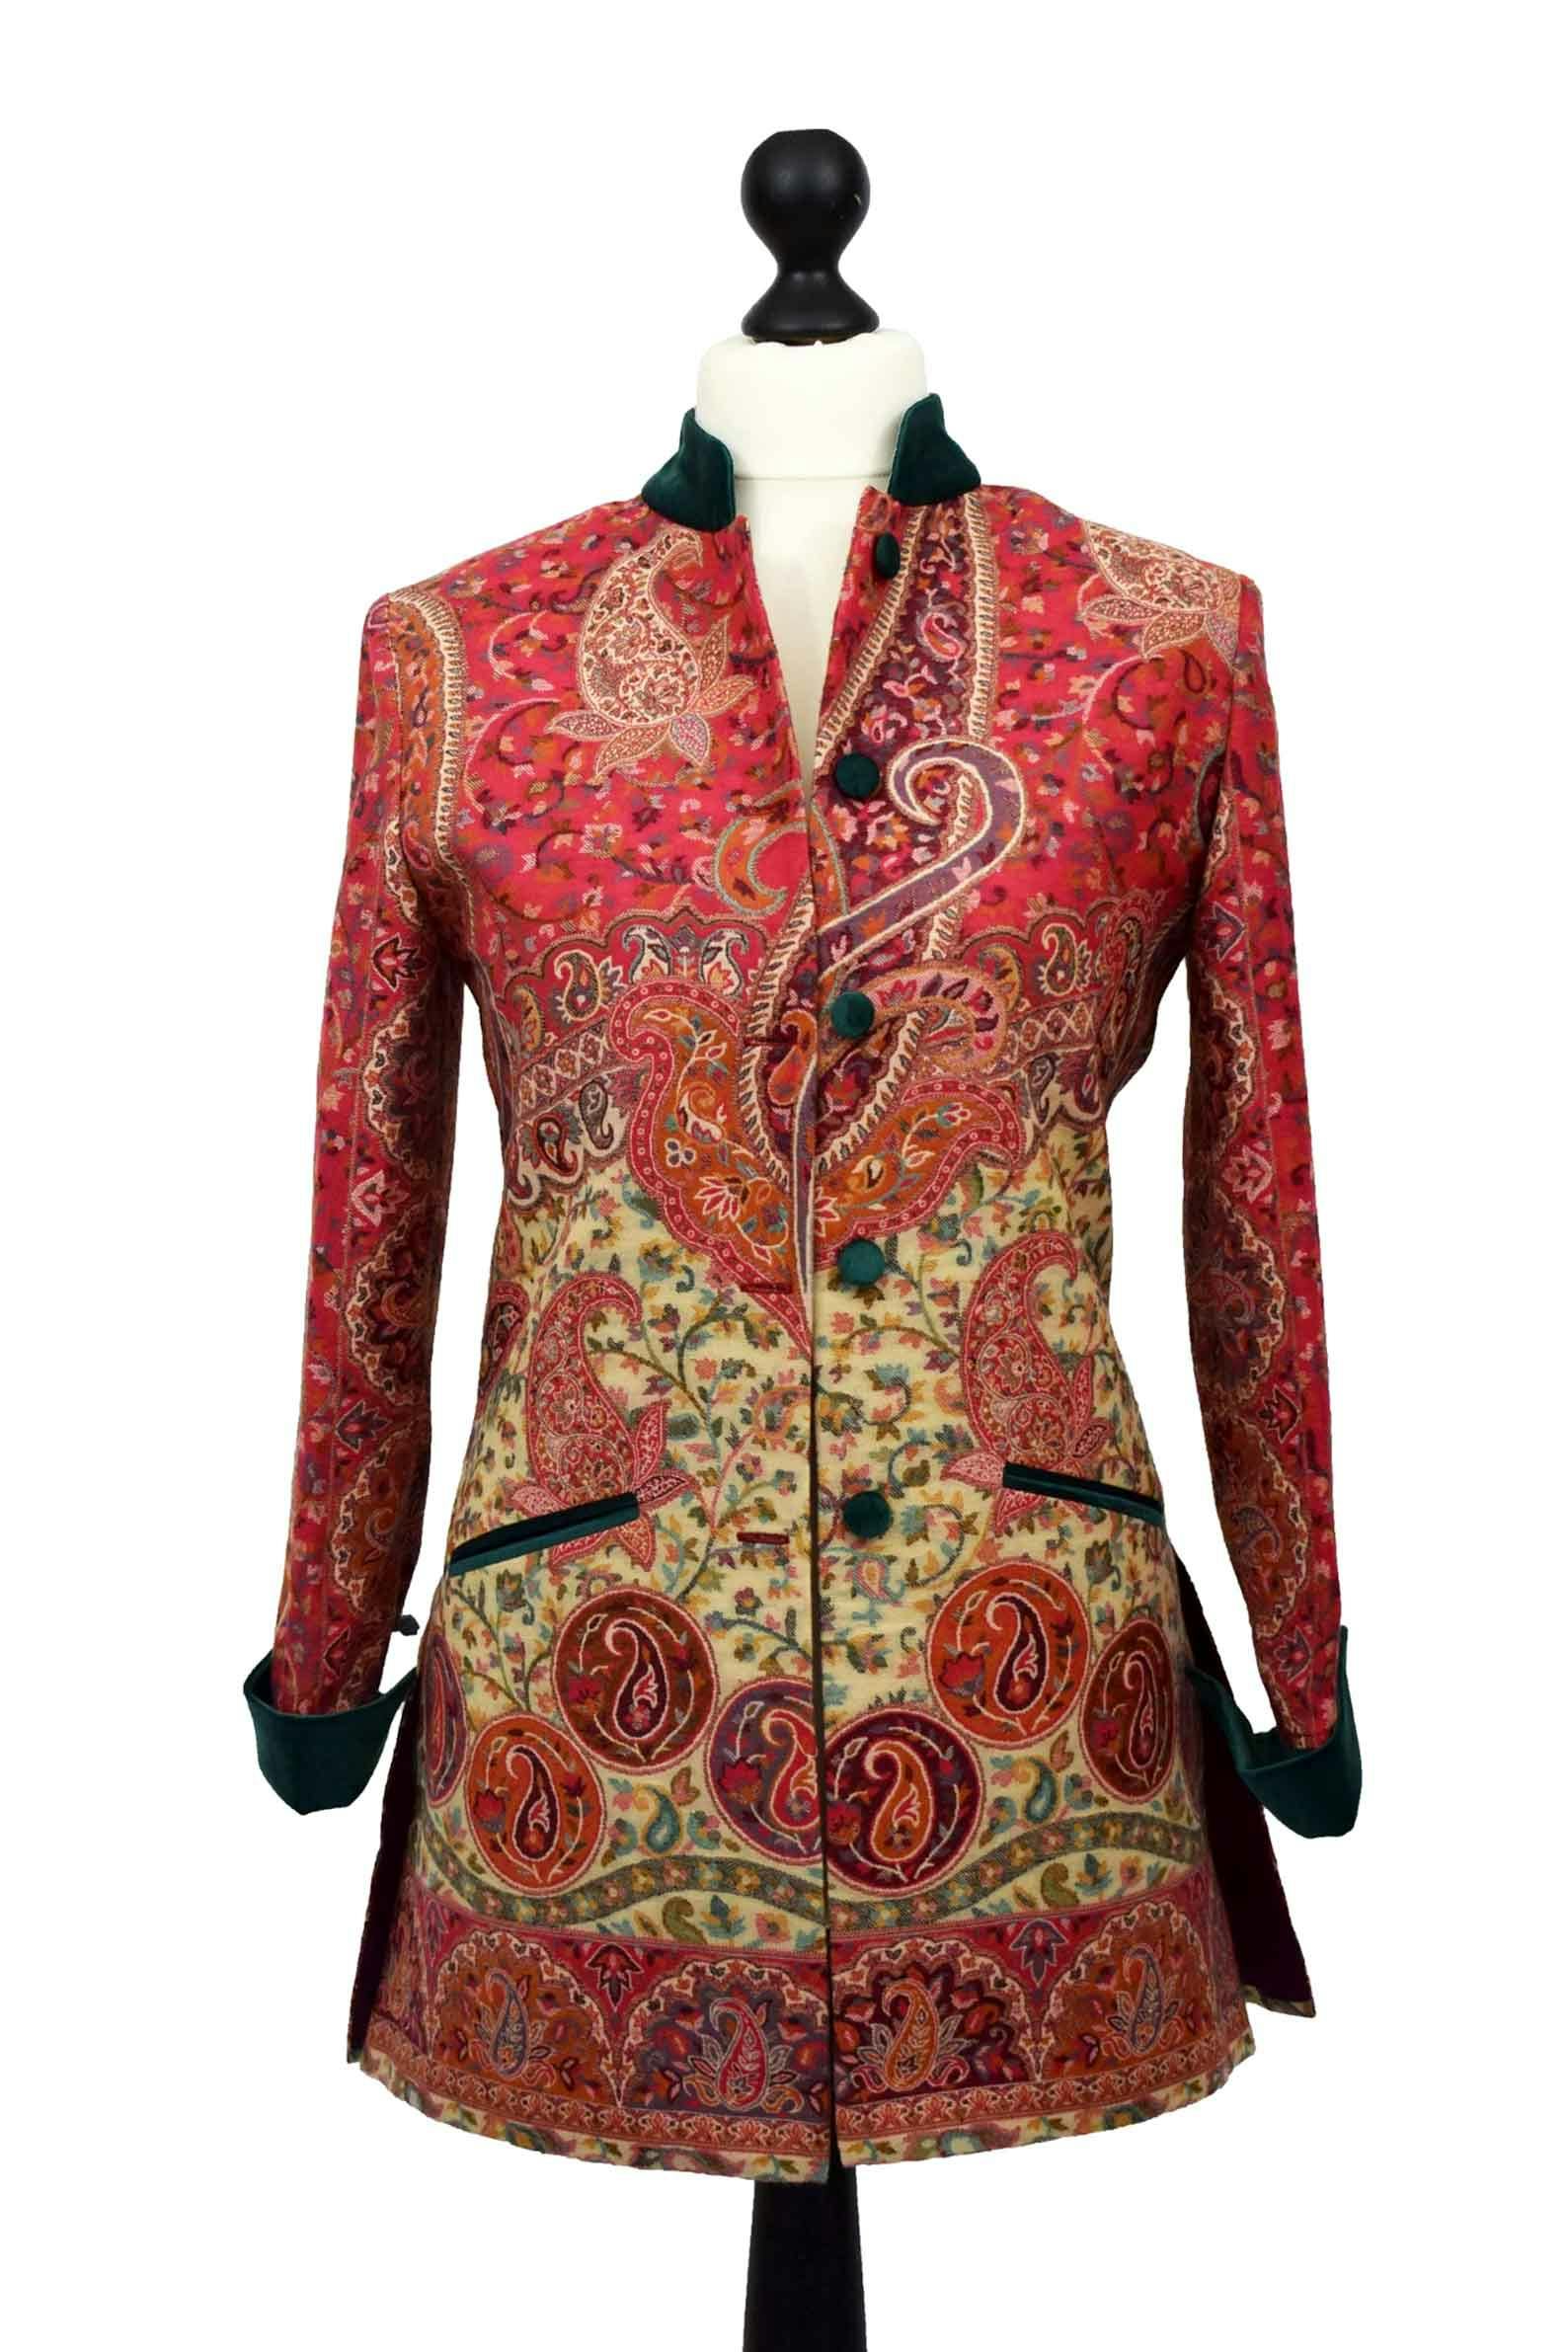 Merino wool red jacket with floral detailing